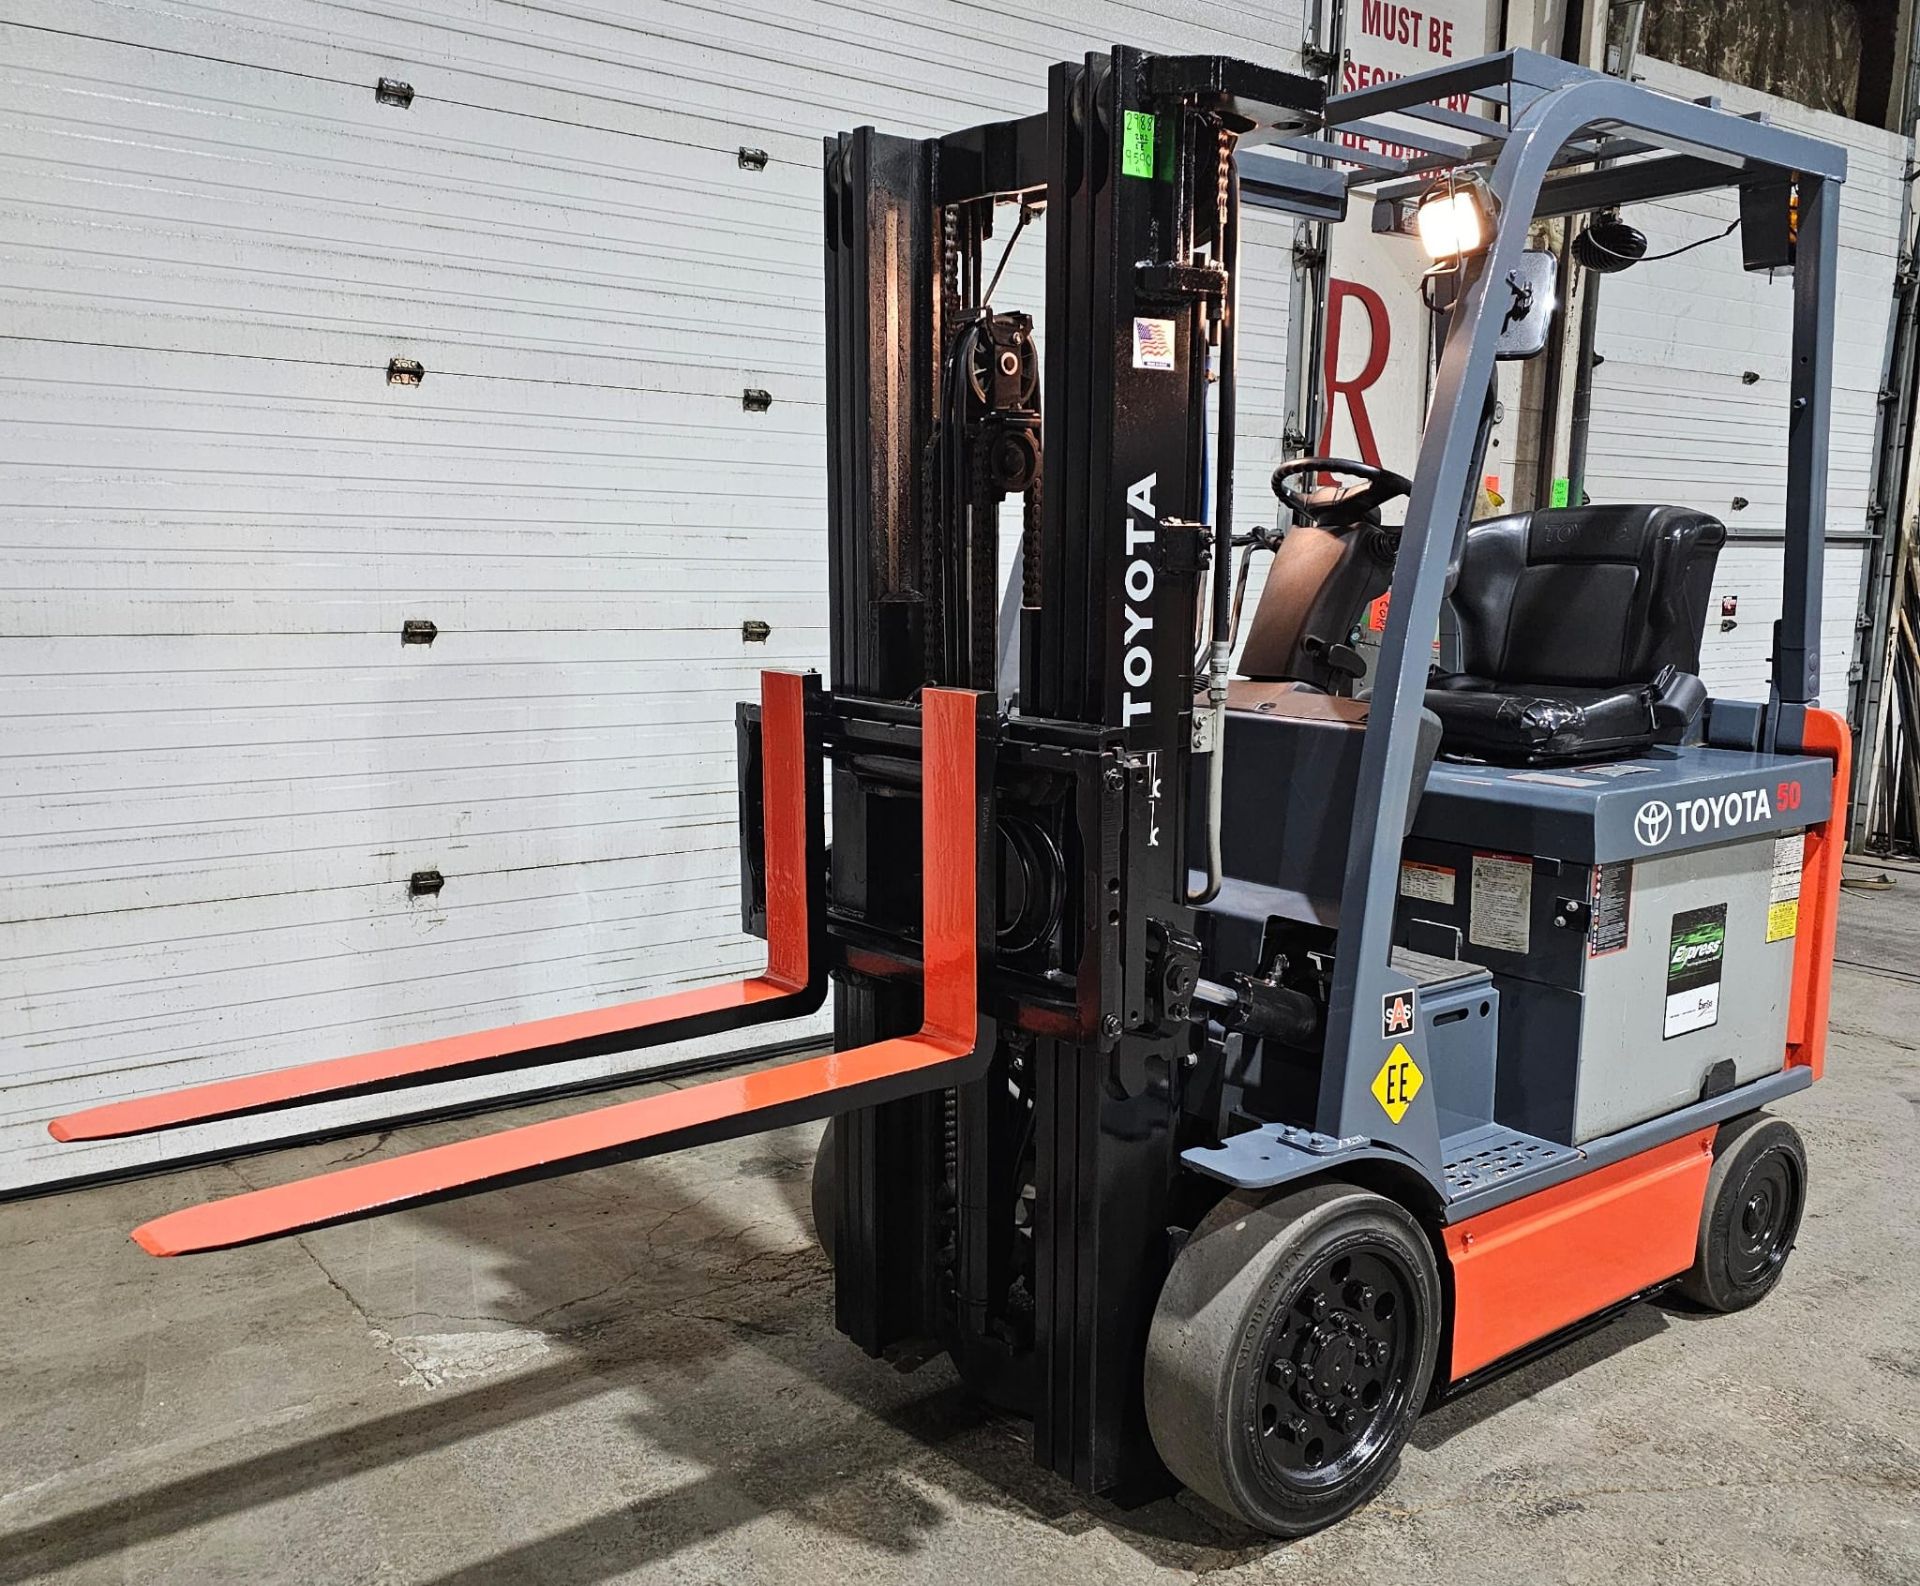 2012 TOYOTA 5,000lbs Capacity Electric Forklift 48V with sideshift & 3-Stage Mast 189" Lift Height - - Image 2 of 6